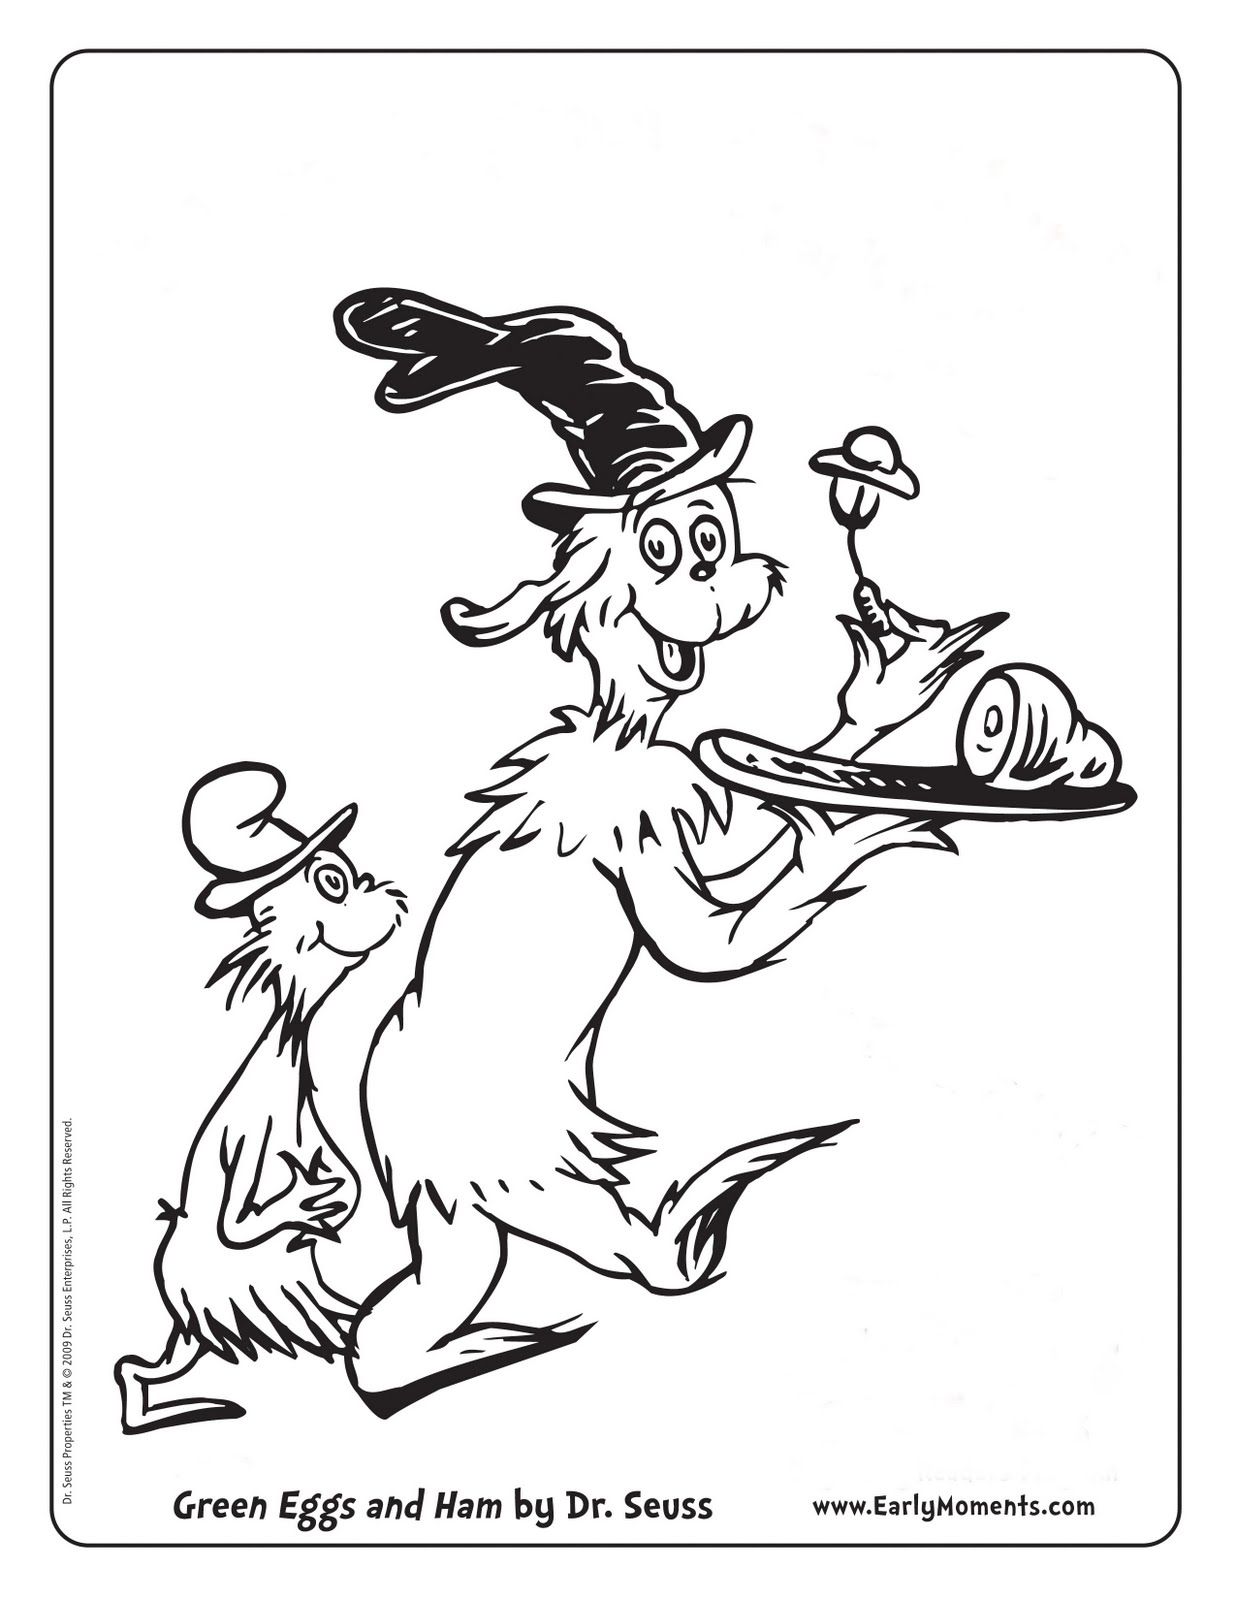 Dr seuss coloring pages dr seuss coloring sheet green eggs and ham